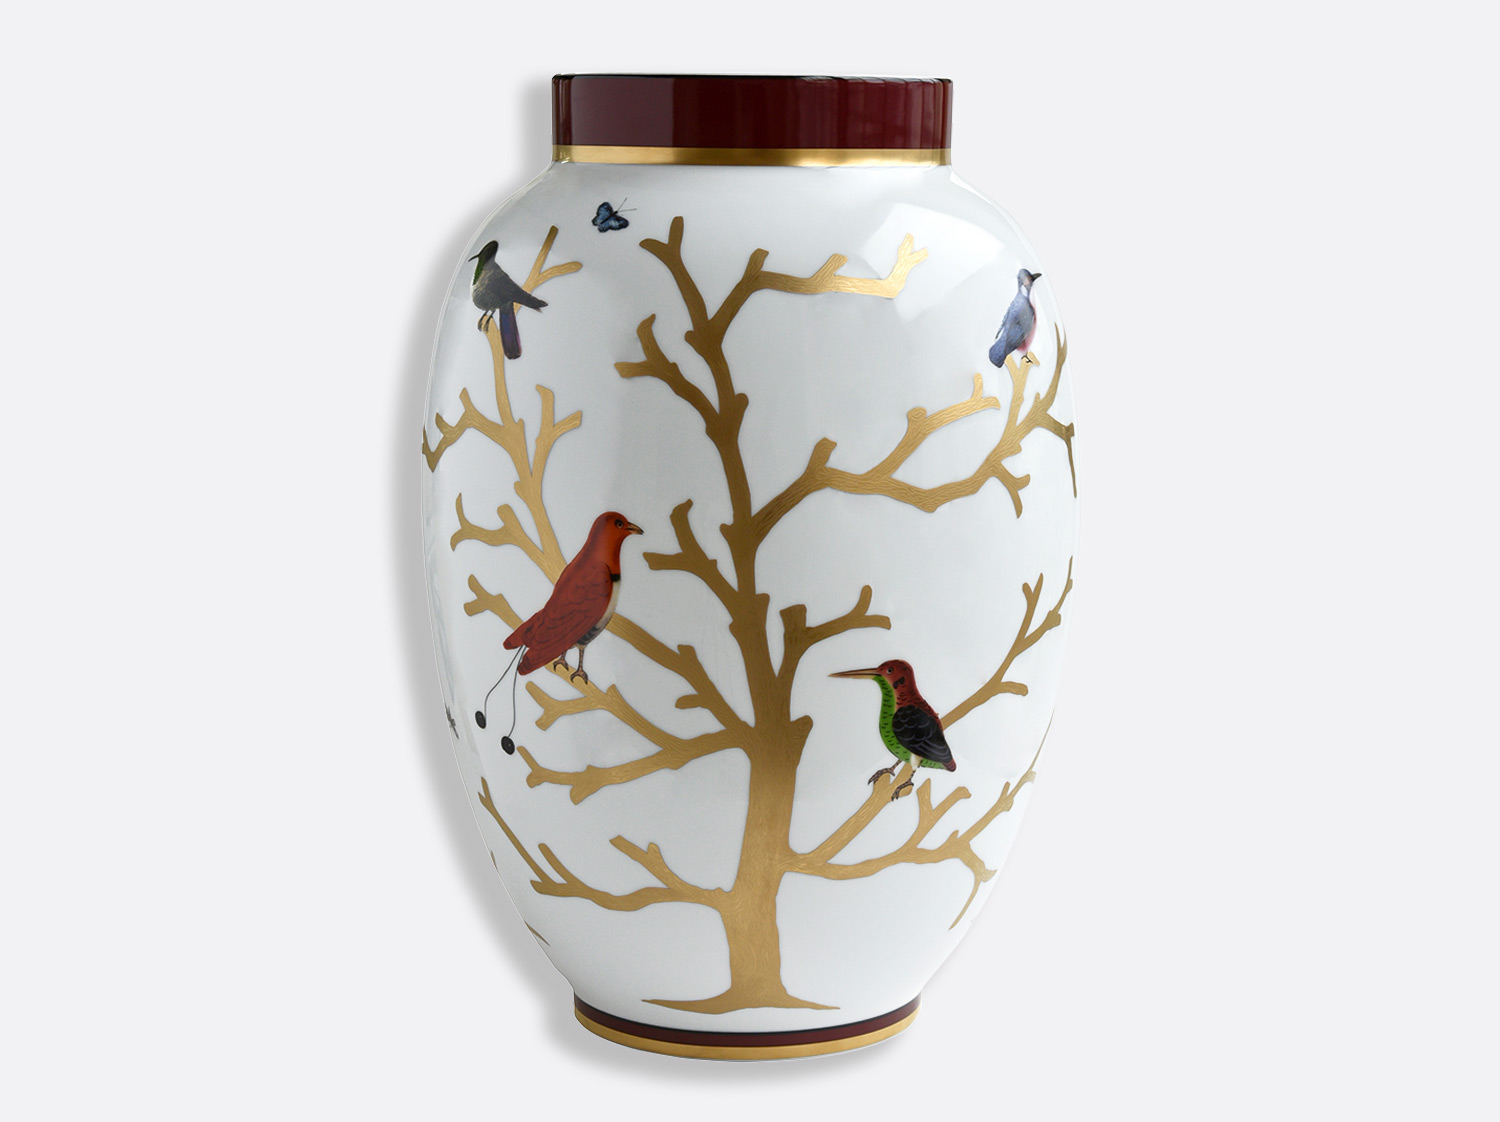 China Large vase 22.4" of the collection Les oiseaux - limited edition | Bernardaud